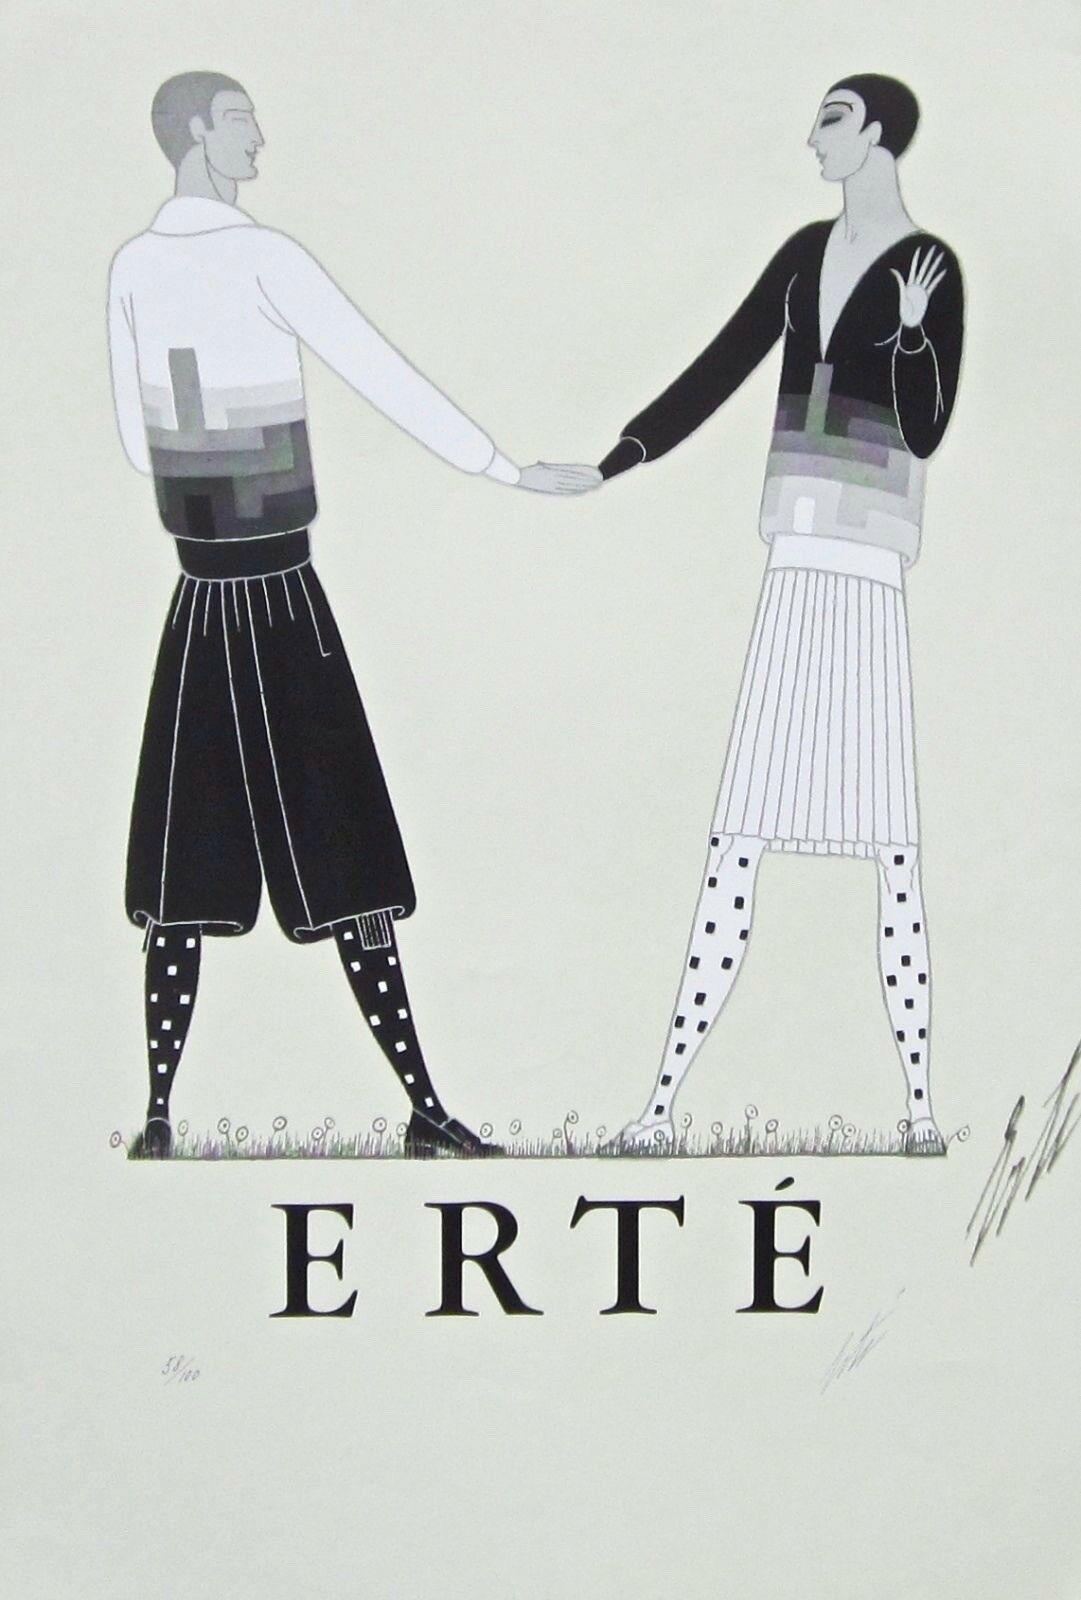 Artist: Erte, Romain de Tirtoff (1892-1990)
Title: Modern Sports Dress for Men
Year: 1968
Medium: Lithograph on archival paper
Edition: 58/100
Size: 30 x 20 inches
Condition: Excellent
Inscription: Signed & numbered by the artist
Notes: Published by